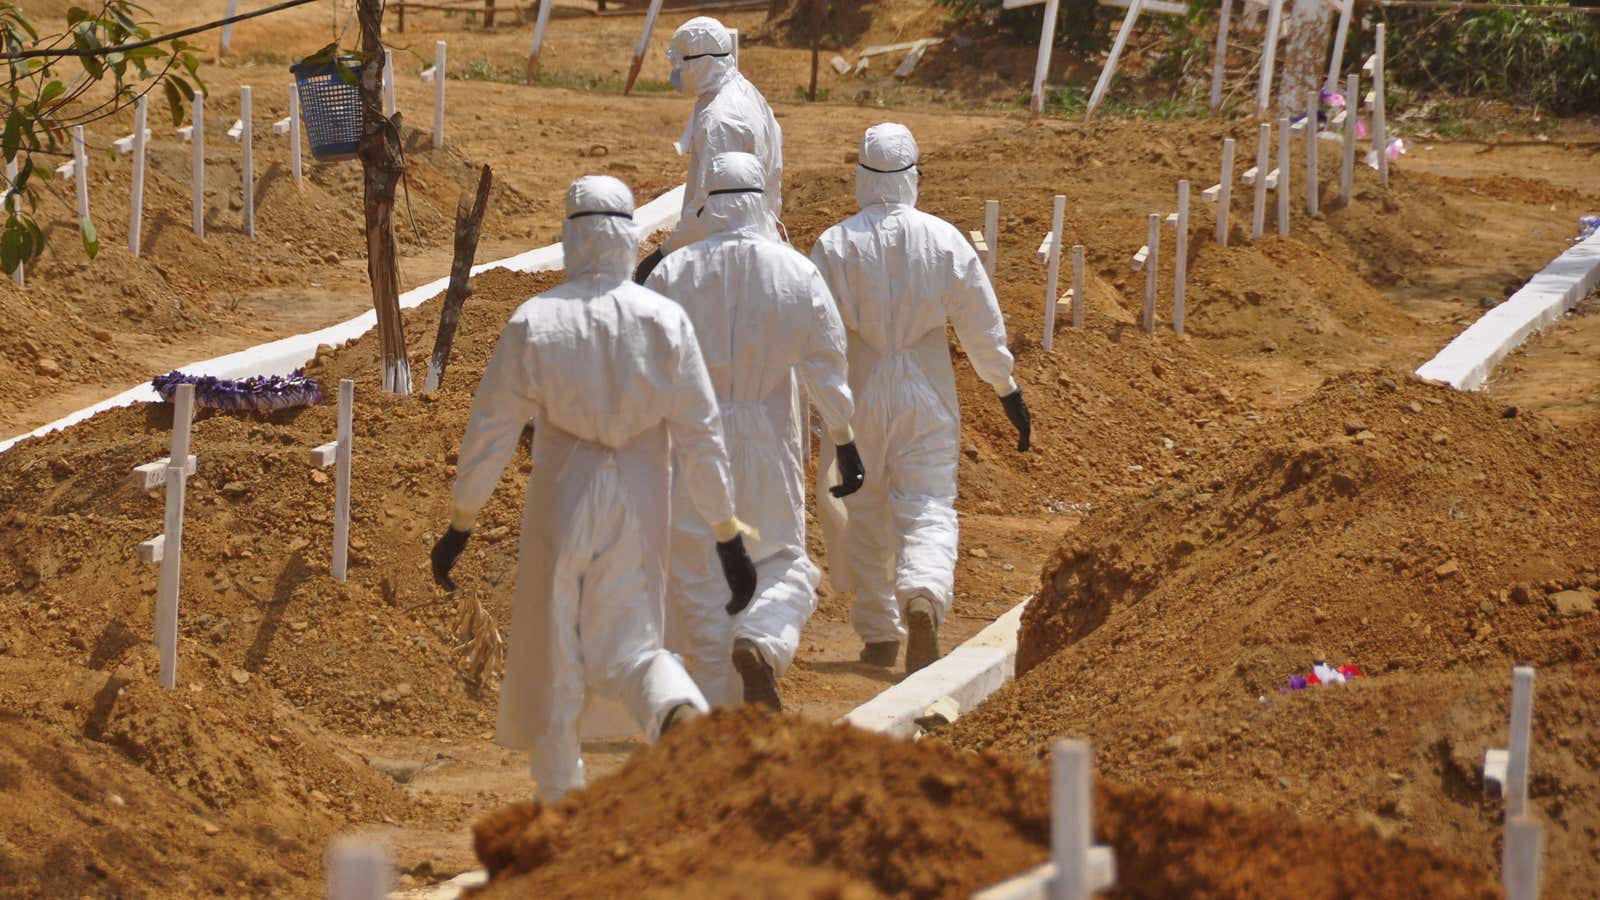 Ebola’s death toll is staggering.